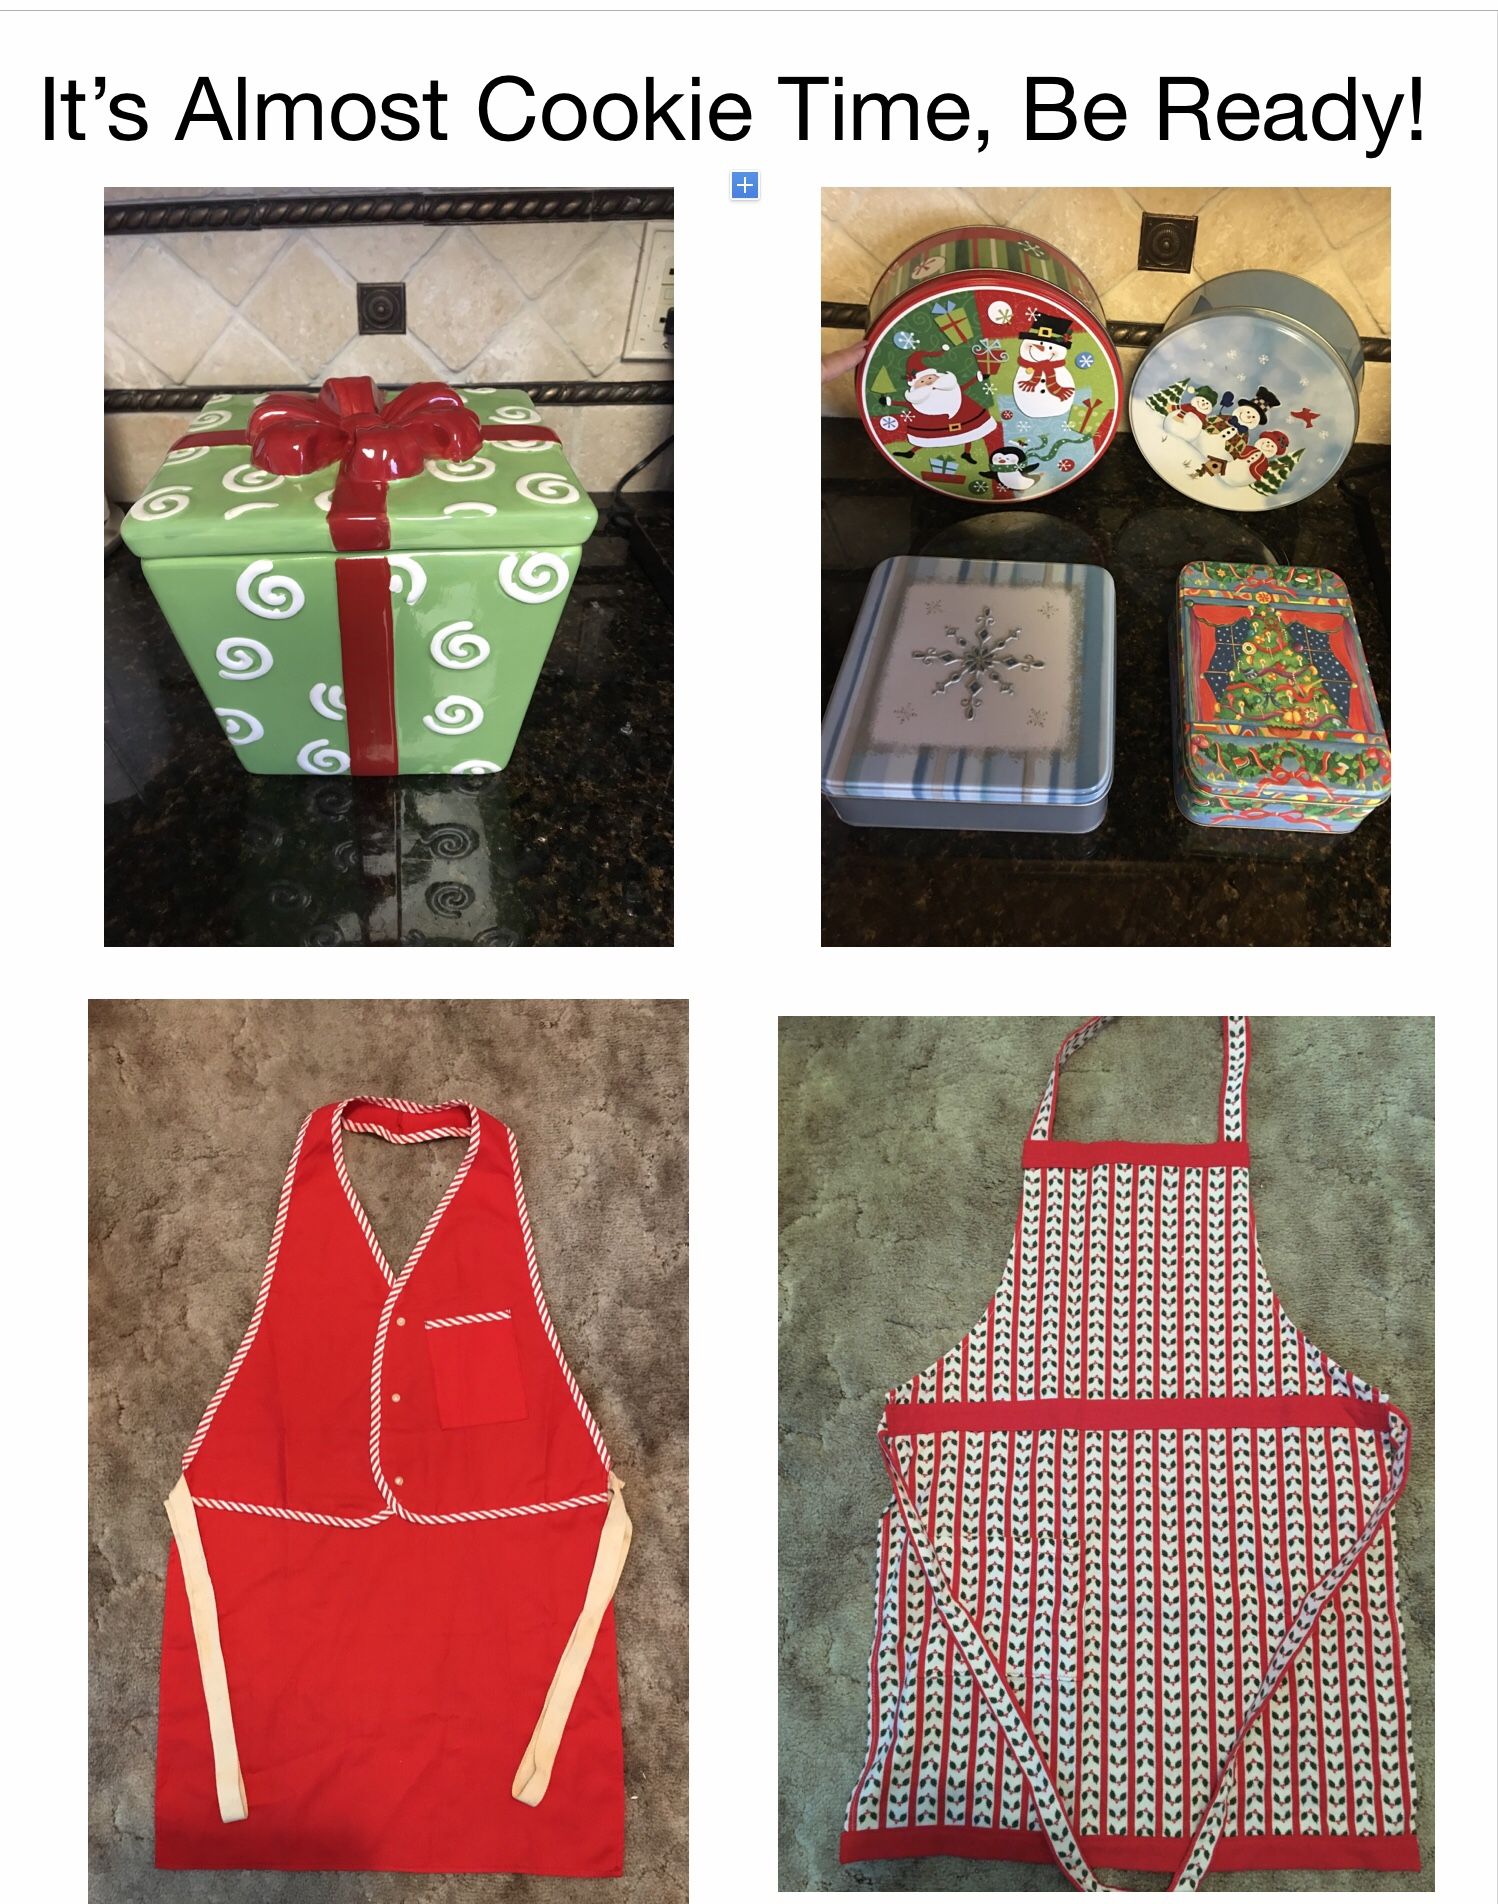 Christmas Cookie Jar $10, ,Red Apron $5, Red White Holly Apron $5 It’s Cookie Time